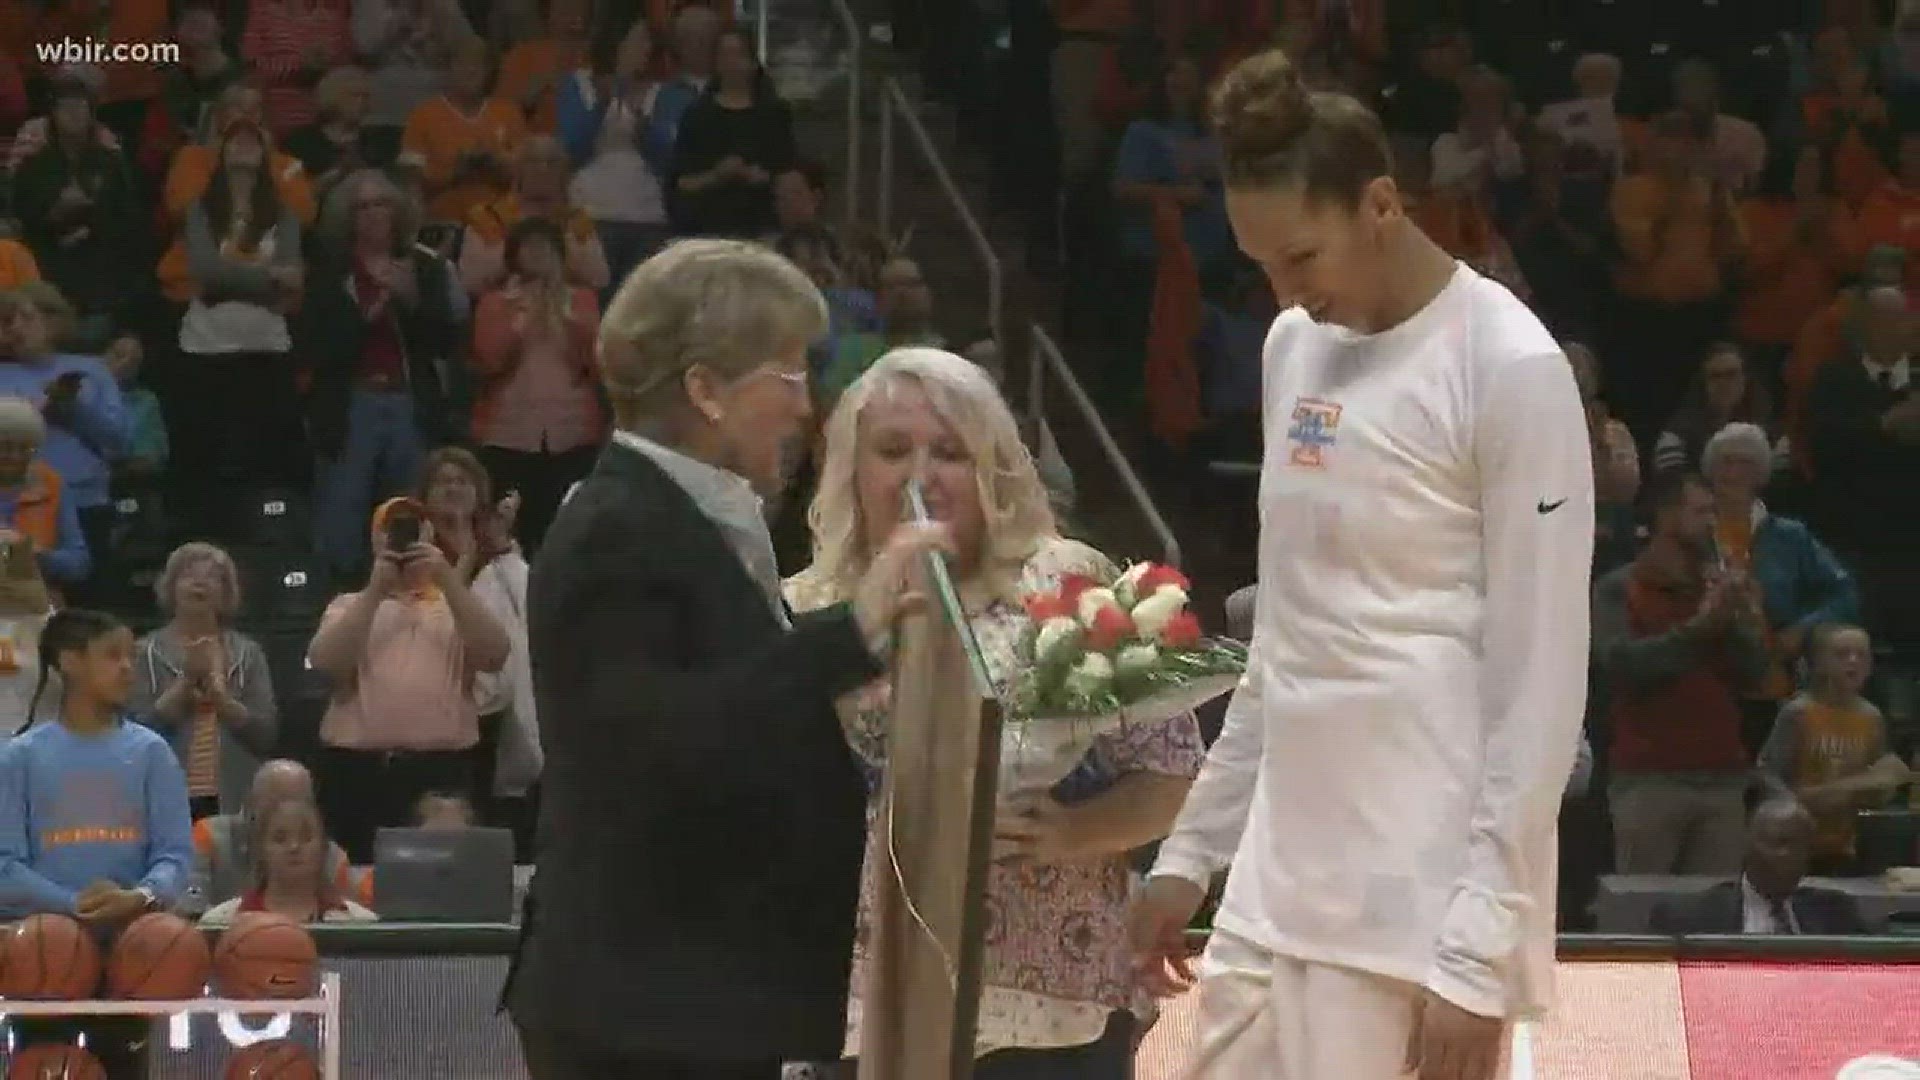 Mercedes Russell, Jaime Nared, and Kortney Dunbar all had special moments on Senior Day.